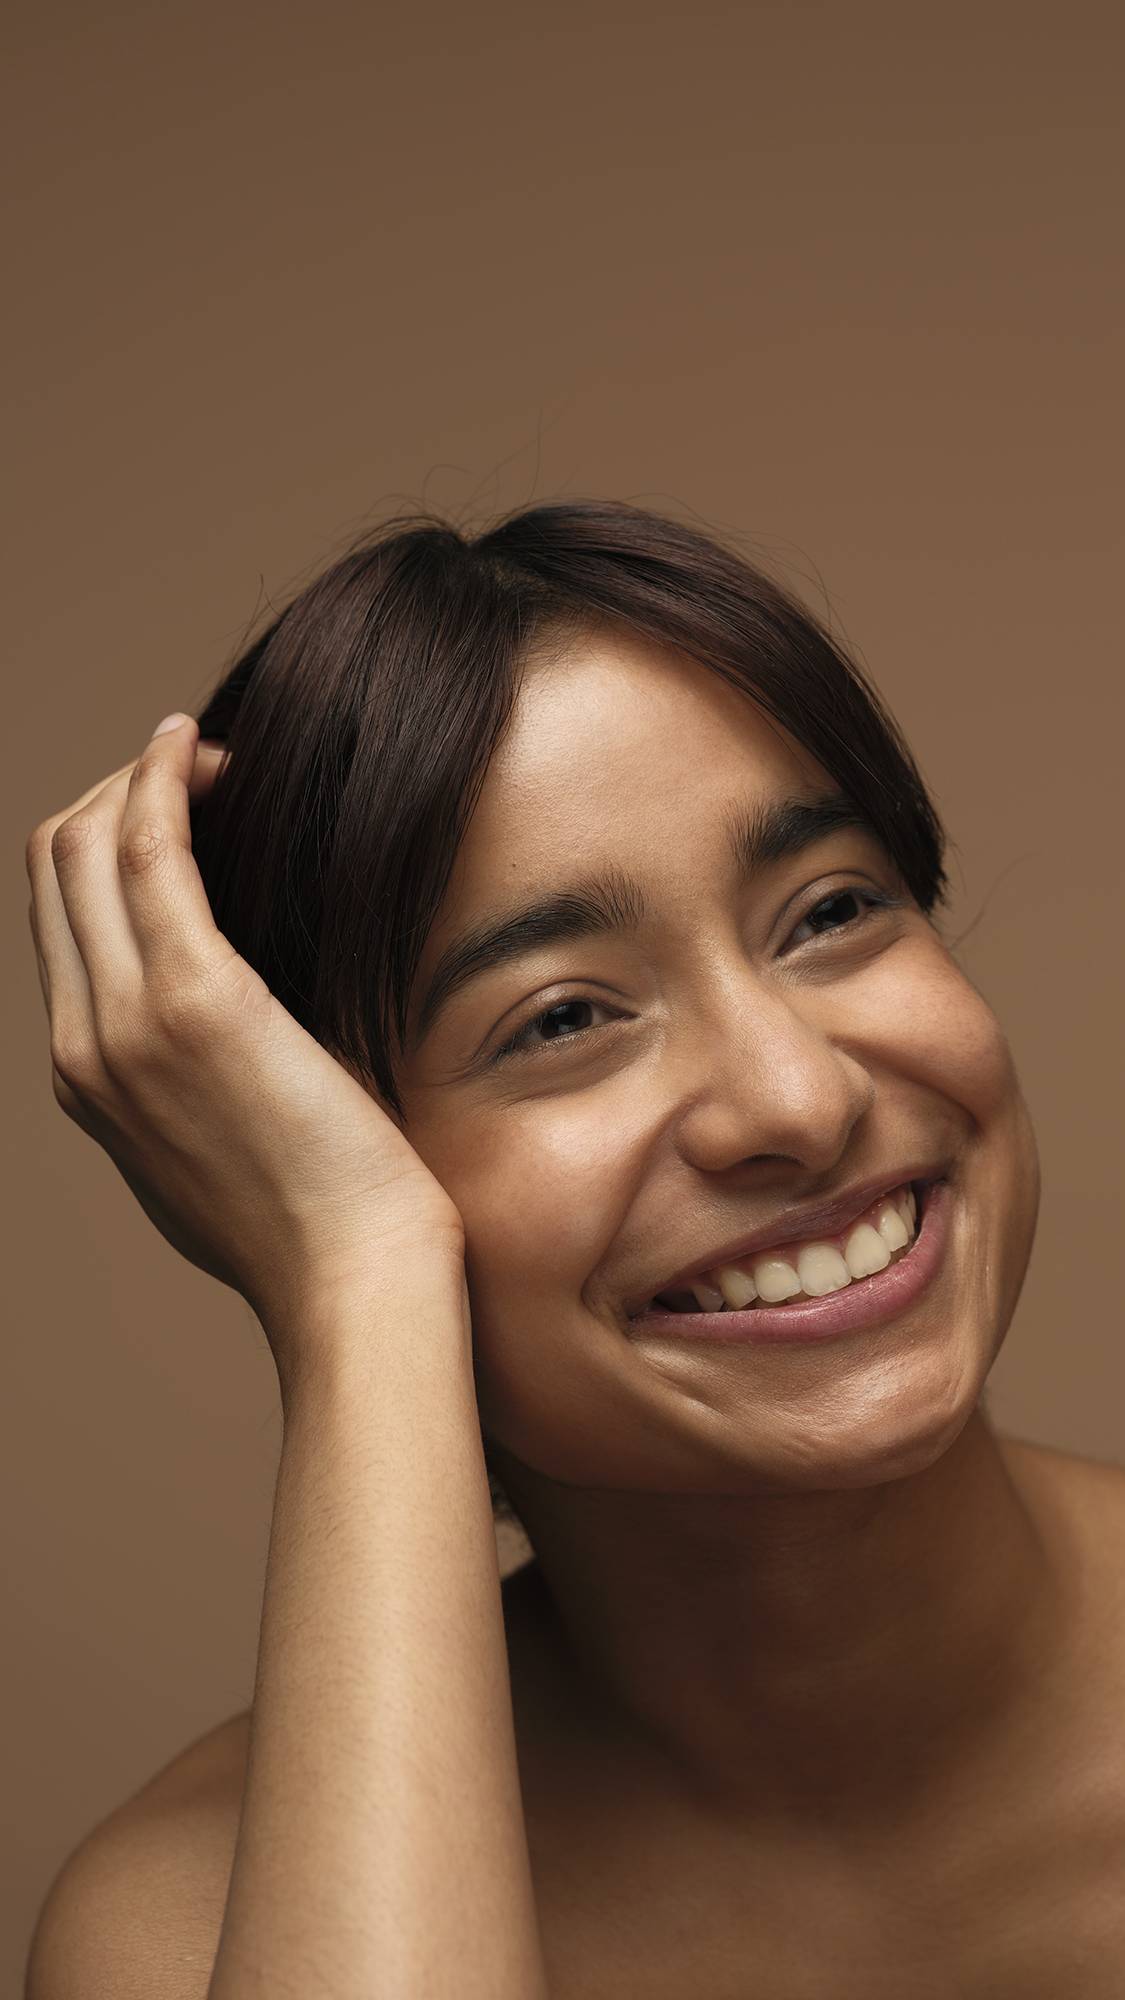 The model is on a warm, earthy-brown background with their head rested upon their hand as they are smiling with glowing, freshly moisturised skin. 